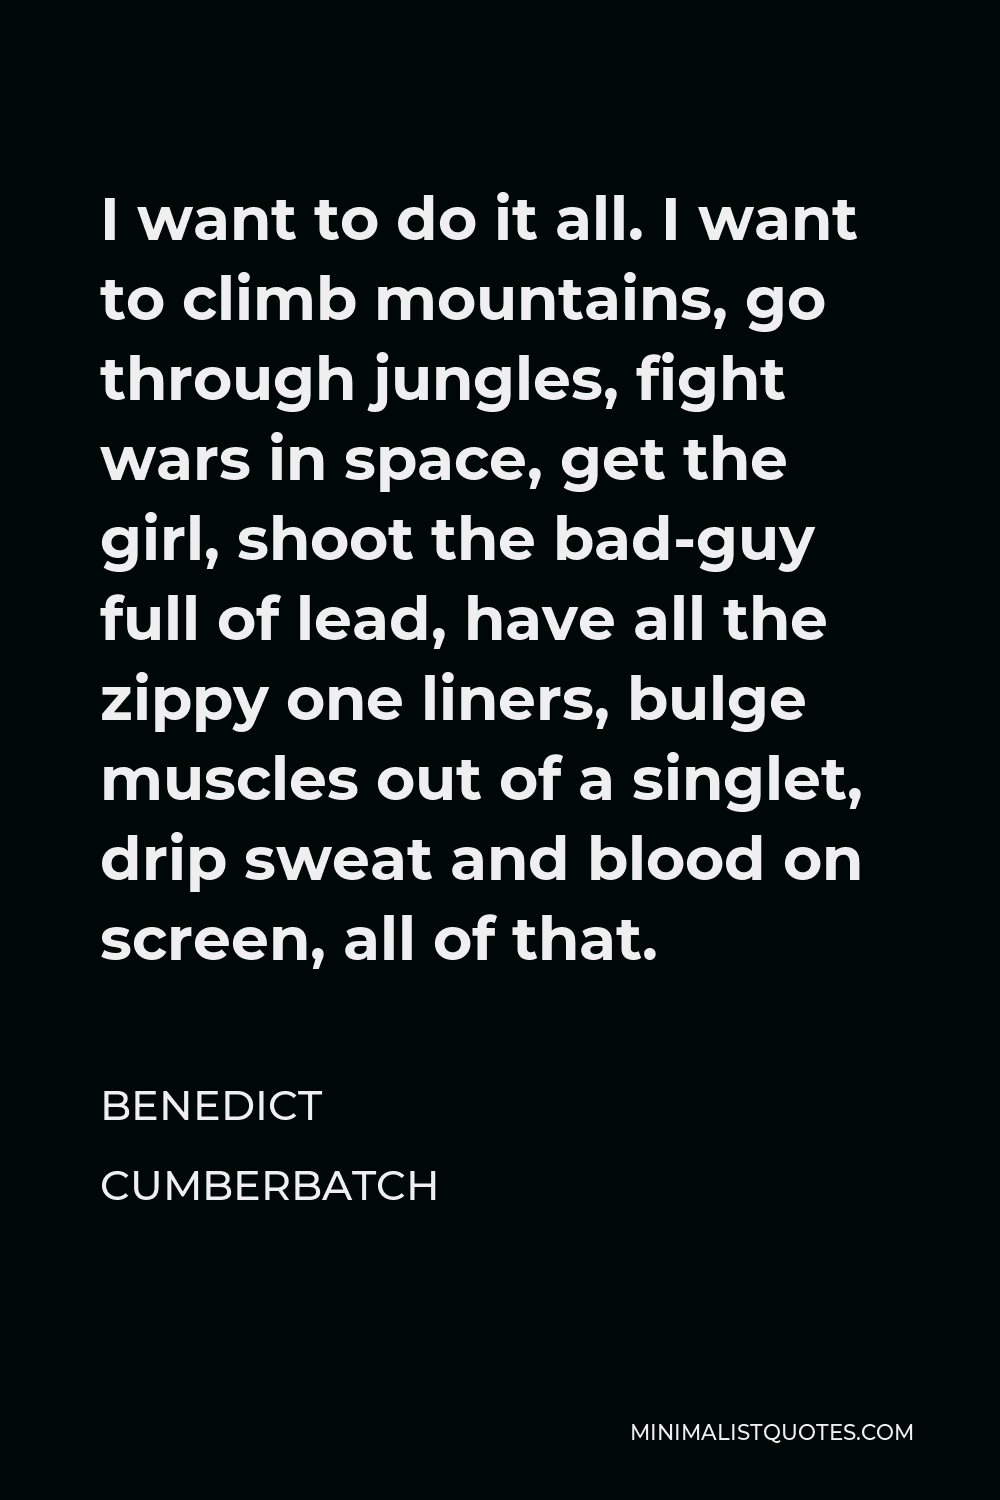 Benedict Cumberbatch Quote - I want to do it all. I want to climb mountains, go through jungles, fight wars in space, get the girl, shoot the bad-guy full of lead, have all the zippy one liners, bulge muscles out of a singlet, drip sweat and blood on screen, all of that.